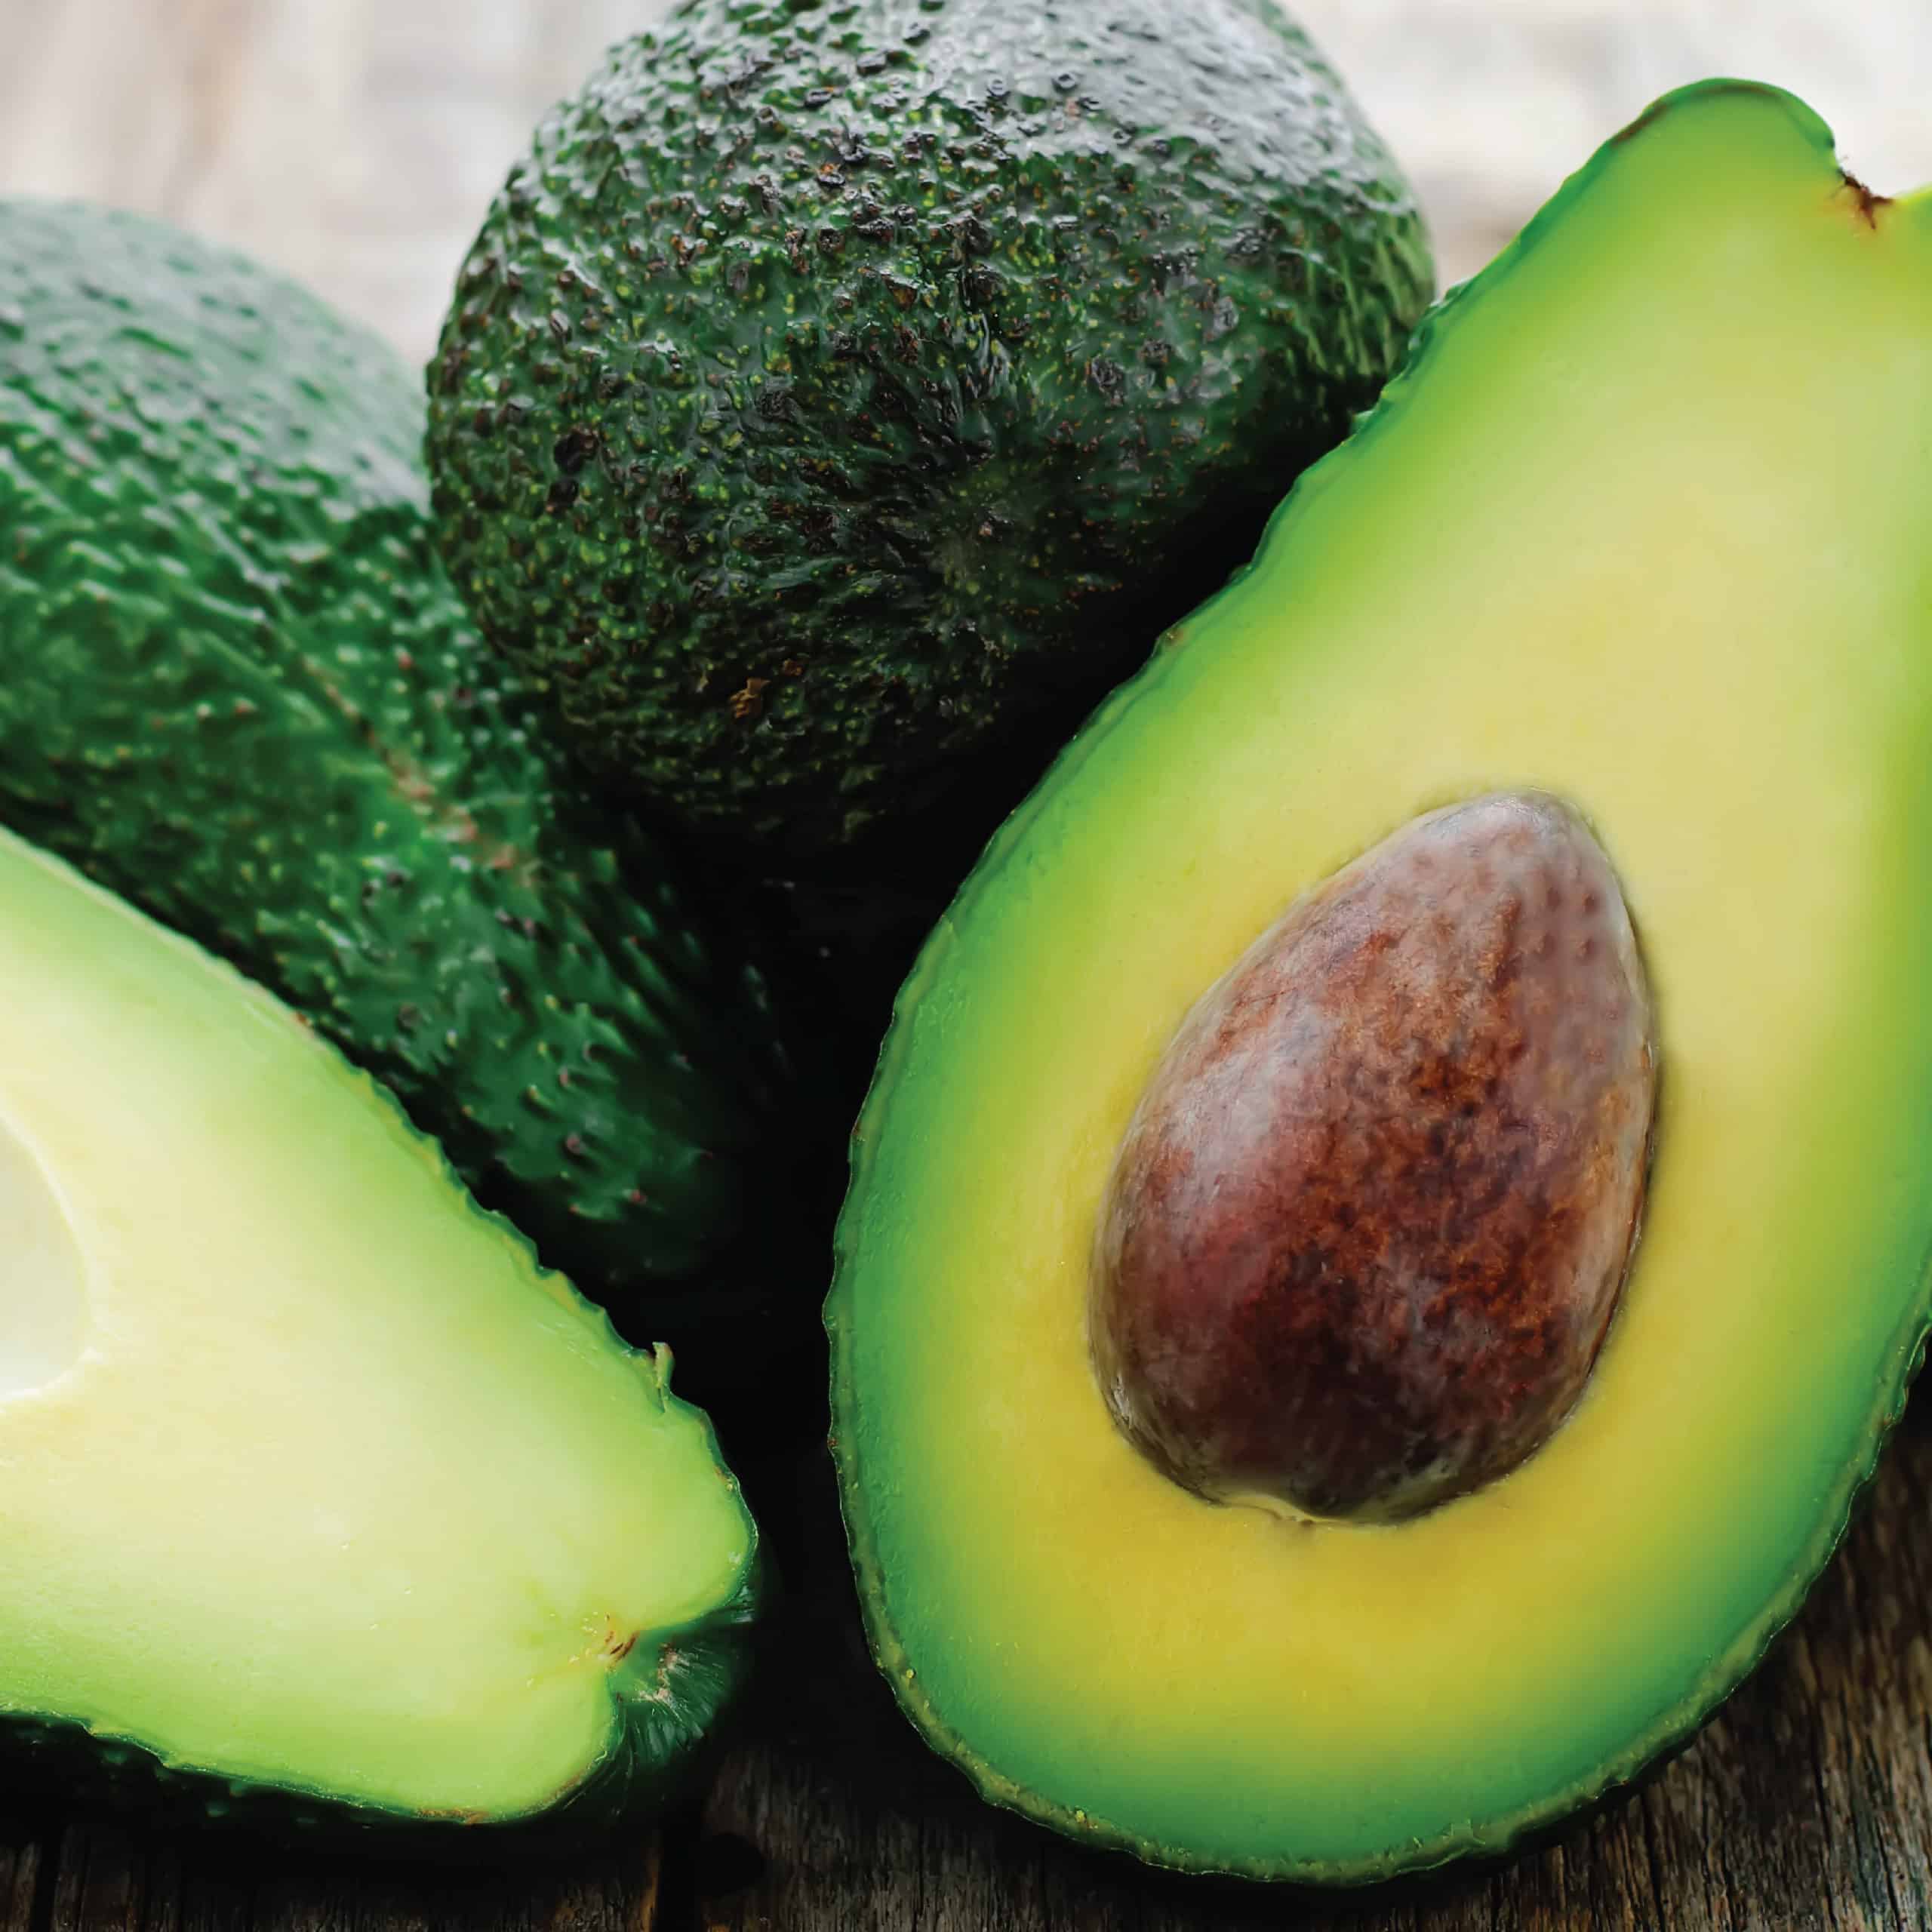 Calories in Avocado: Are They Healthy?